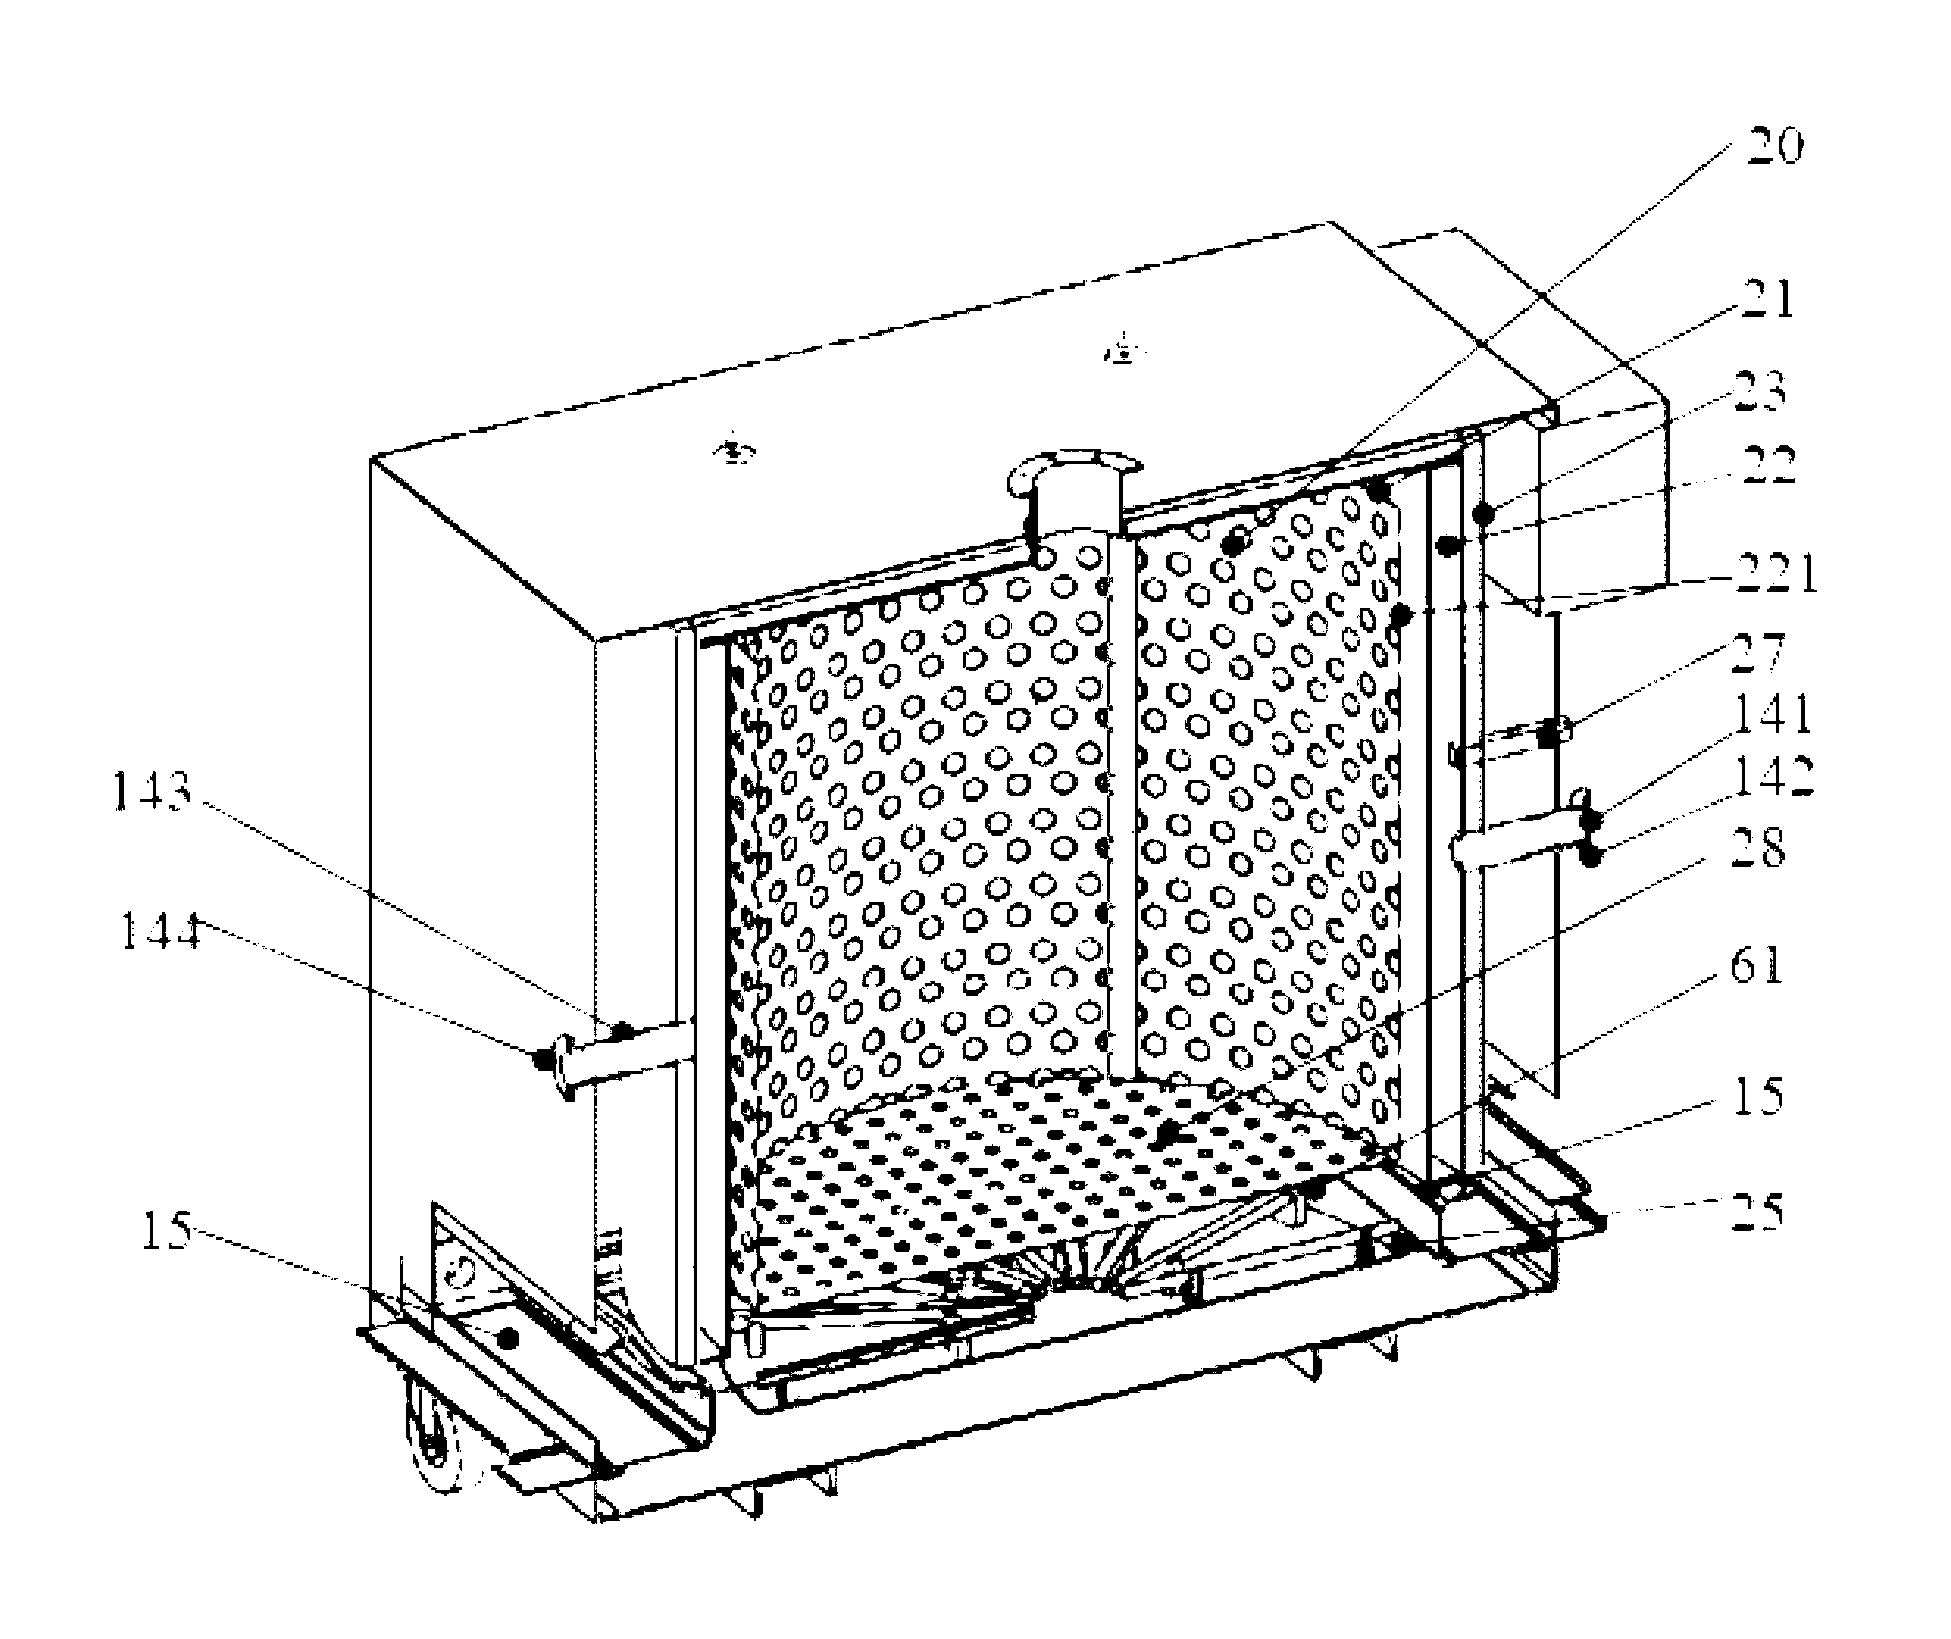 Garbage decomposition processing device